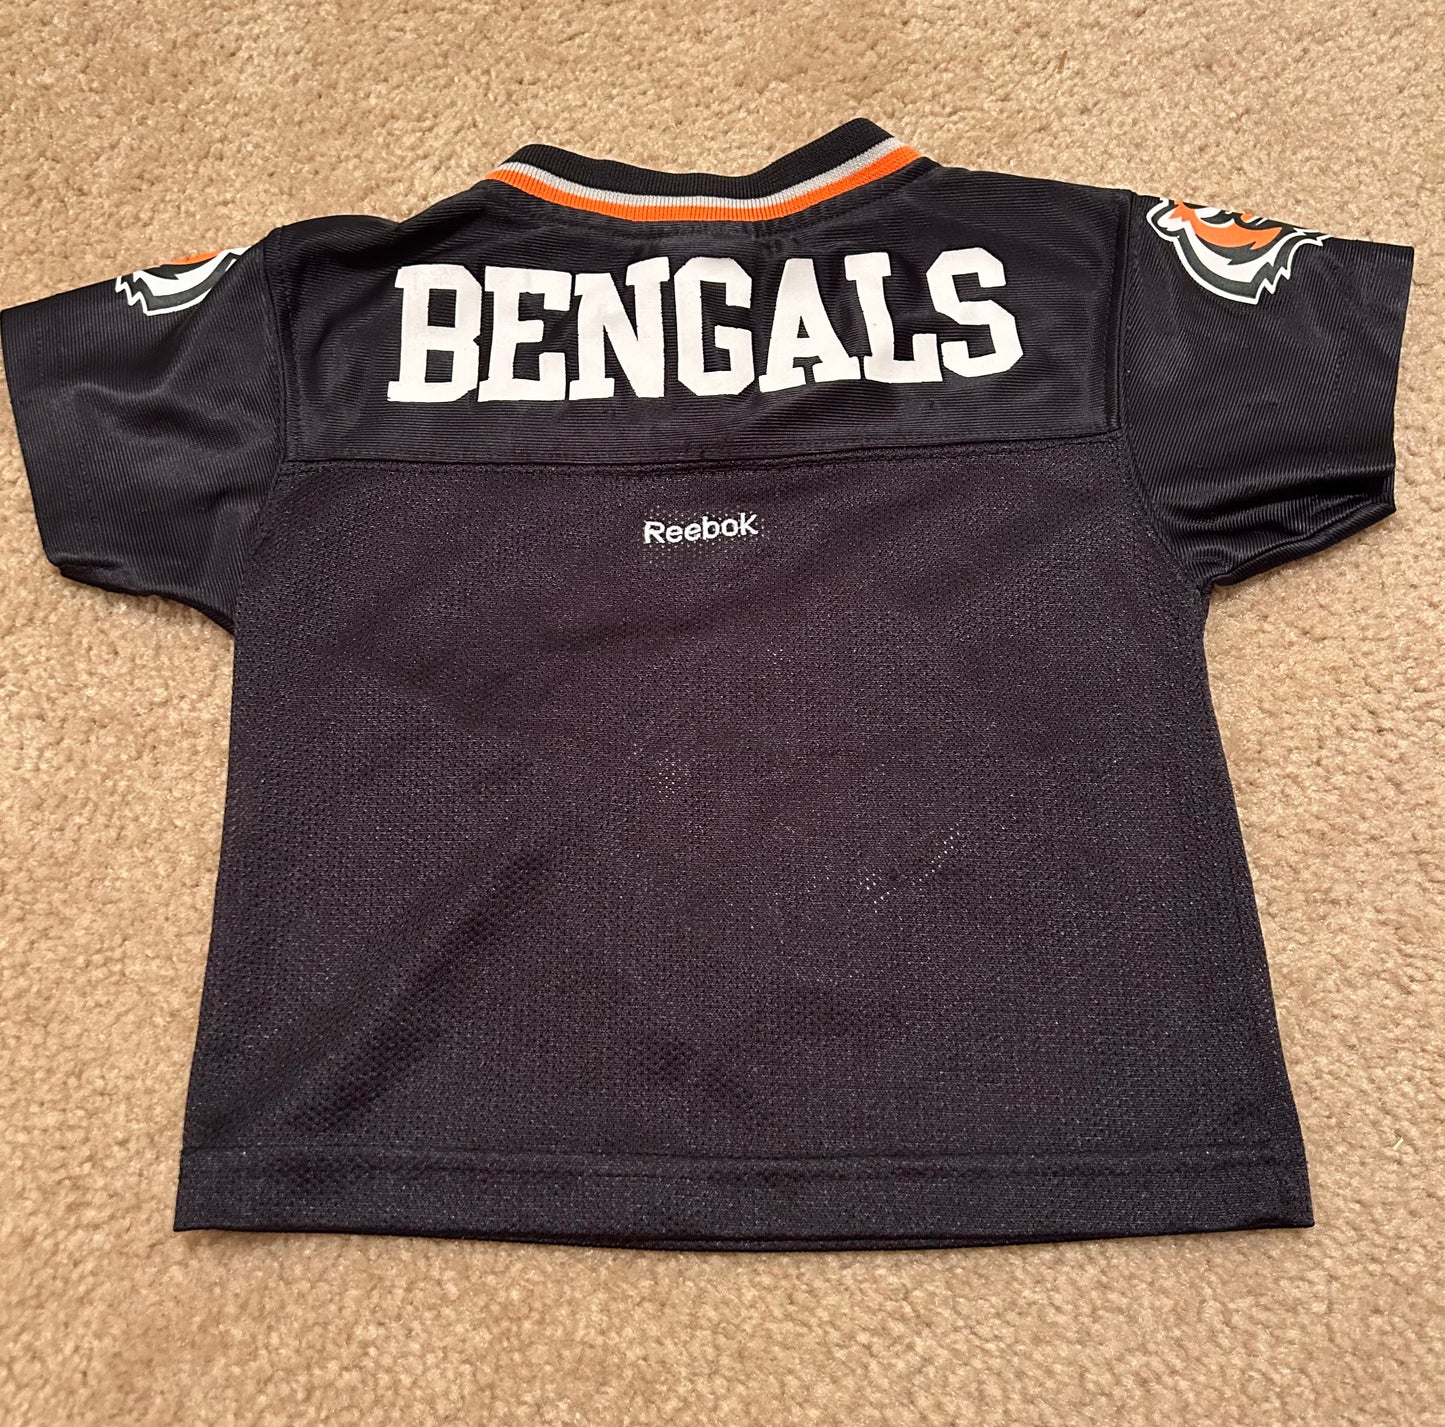 Reebok 2t Generic Bengals Jersey (see pics for back)